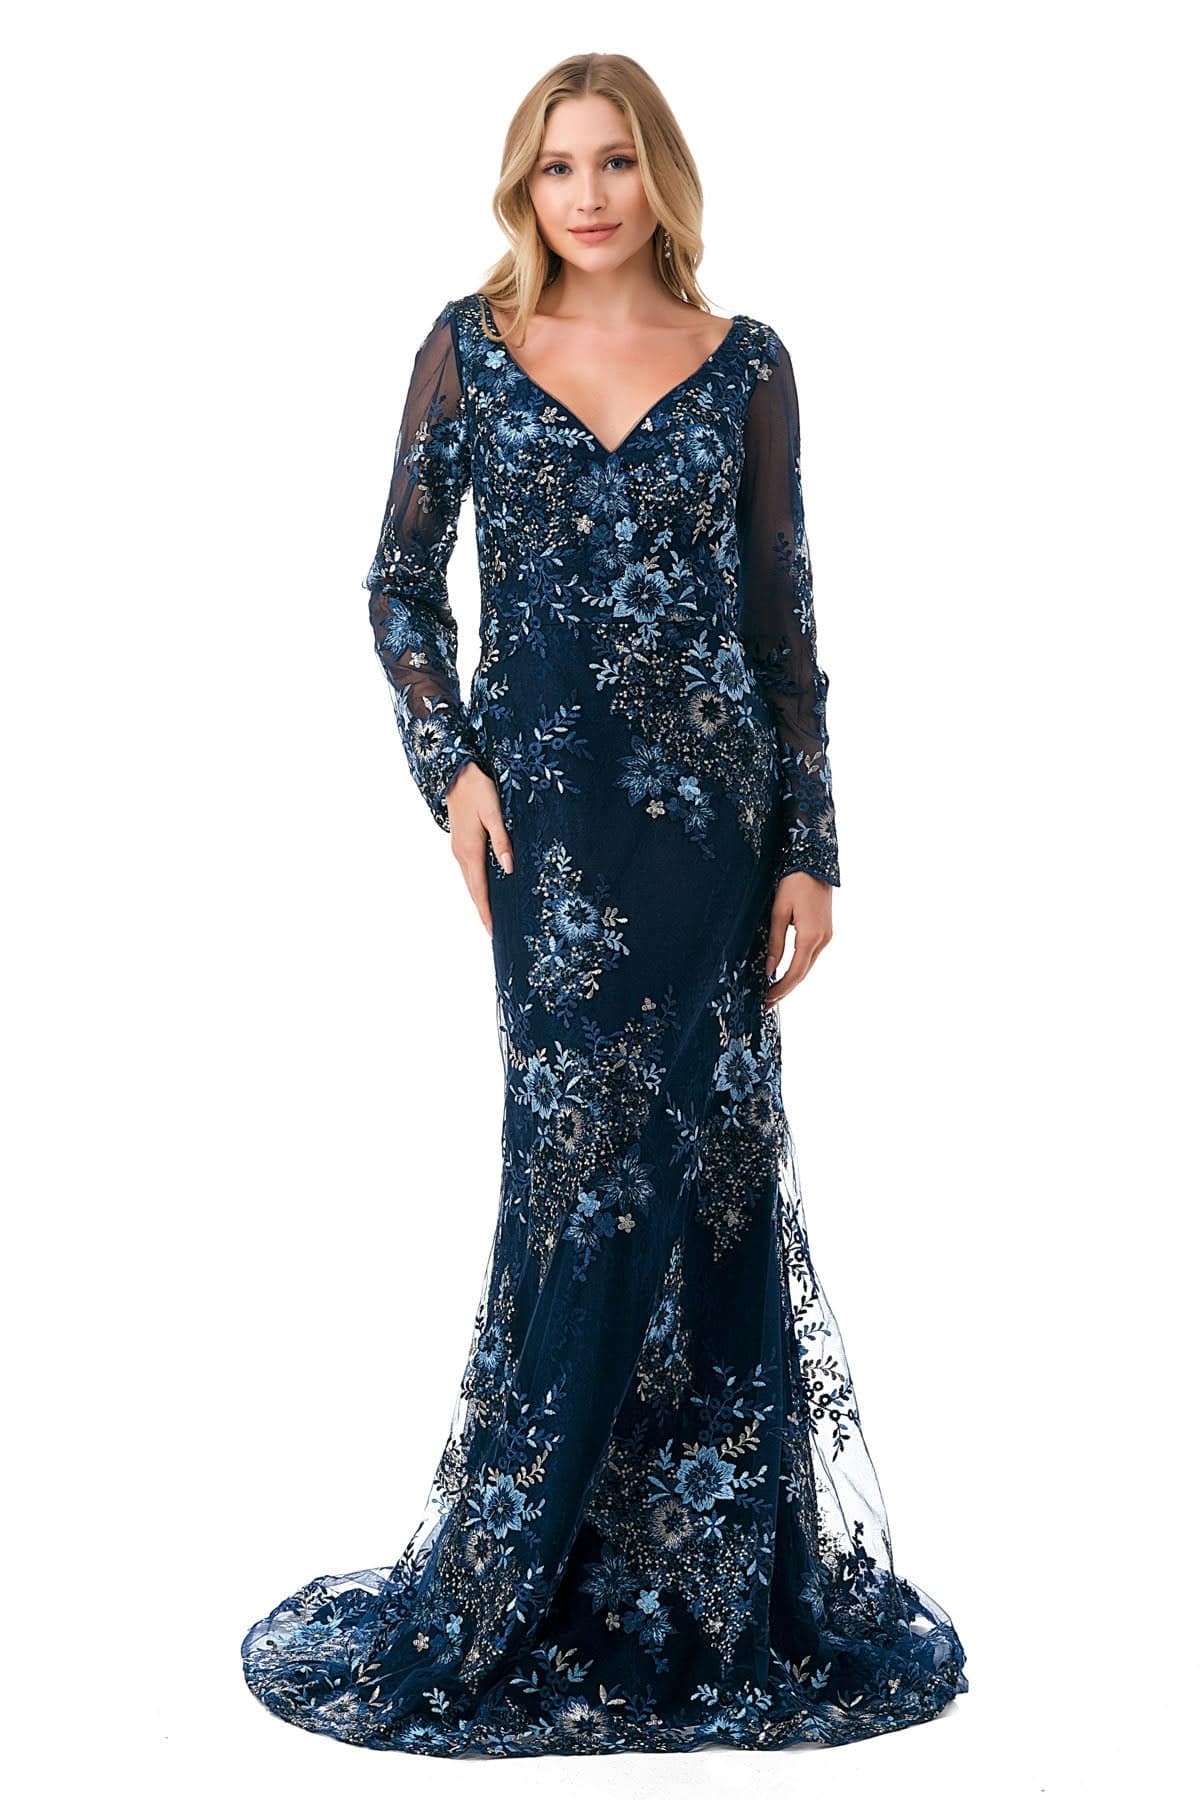 Aspeed M2768F Stunning Floral Lace Mermaid Dress - NORMA REED